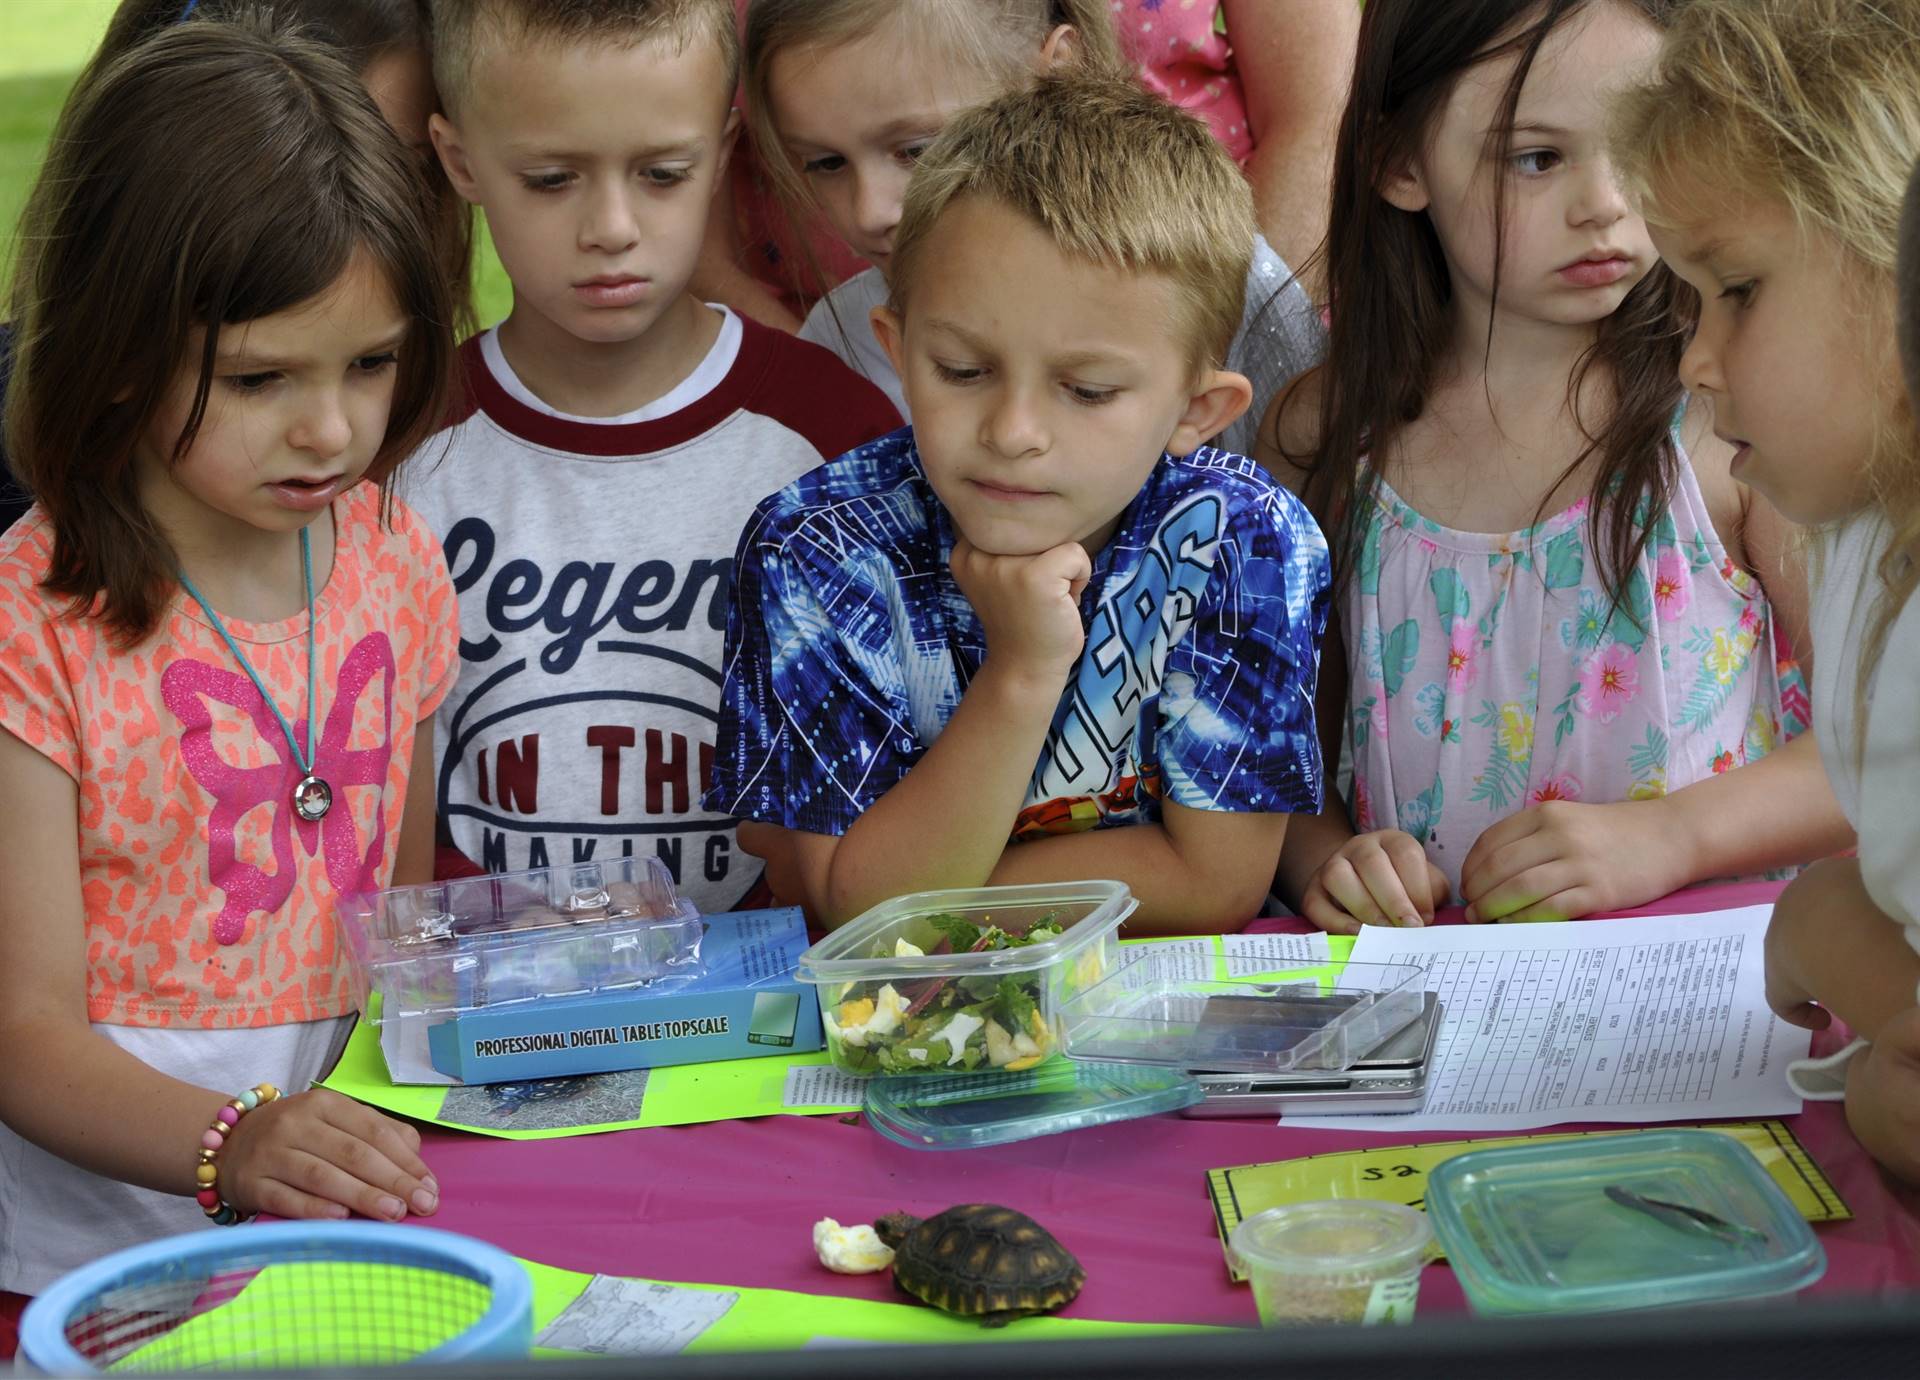 Students observing a turtle eating.